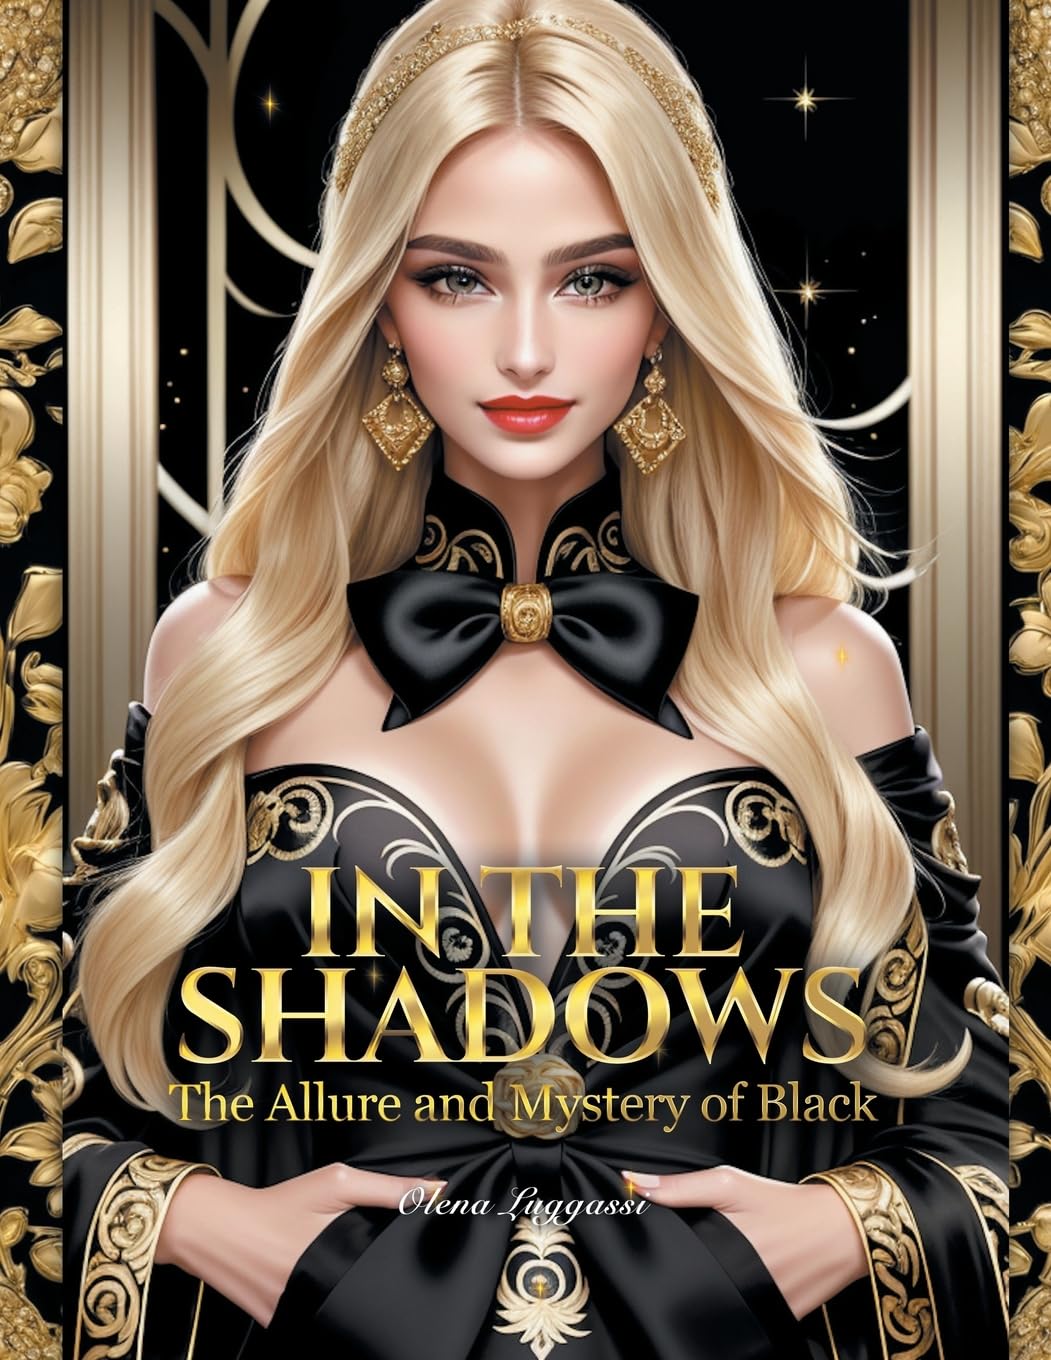 Olena Luggassi book. In the Shadows: The Allure and Mystery of Black